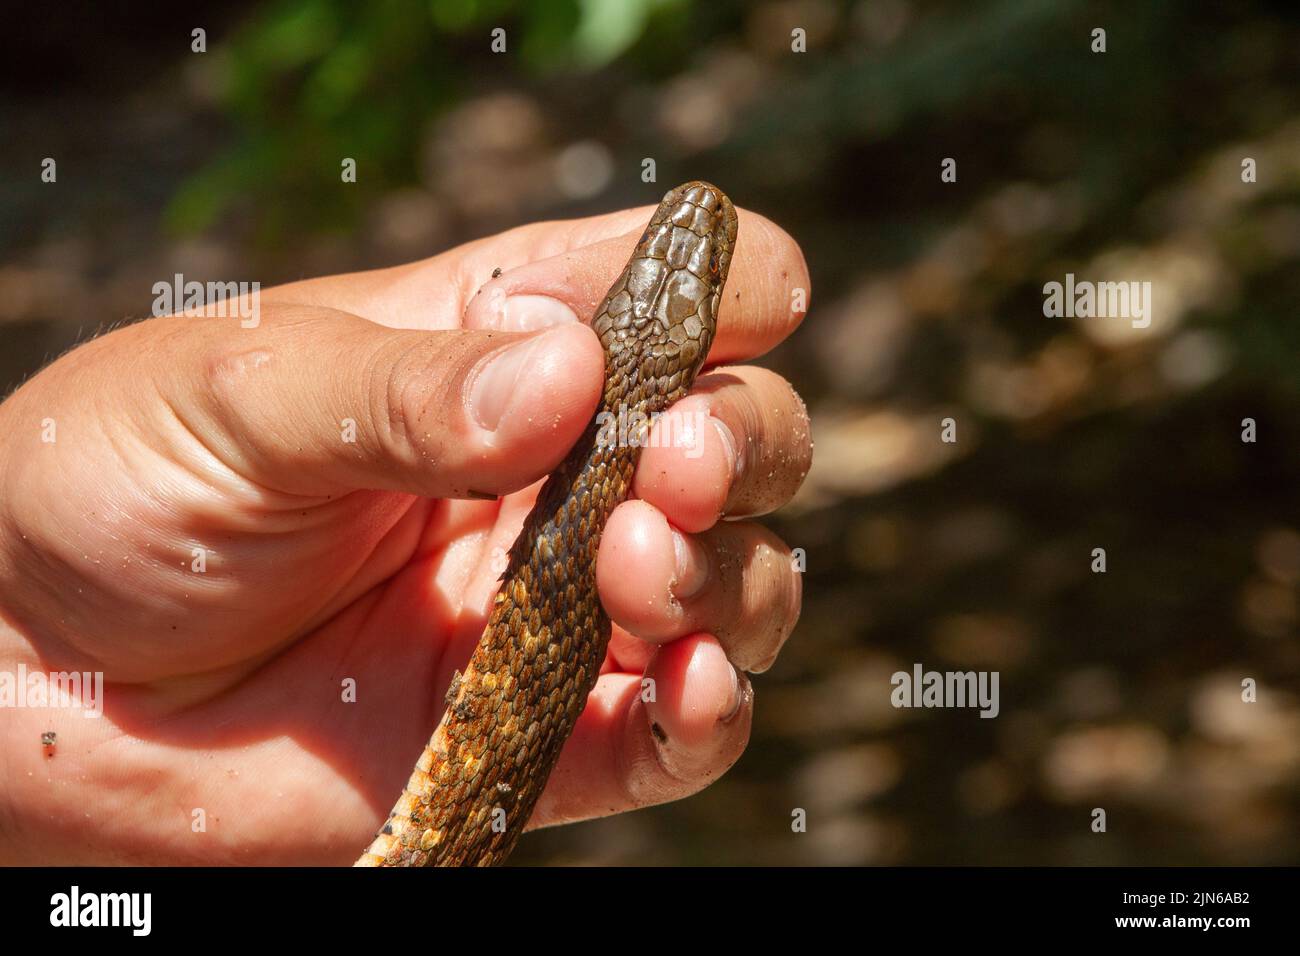 Holding a dice snake by the head in a hand Stock Photo